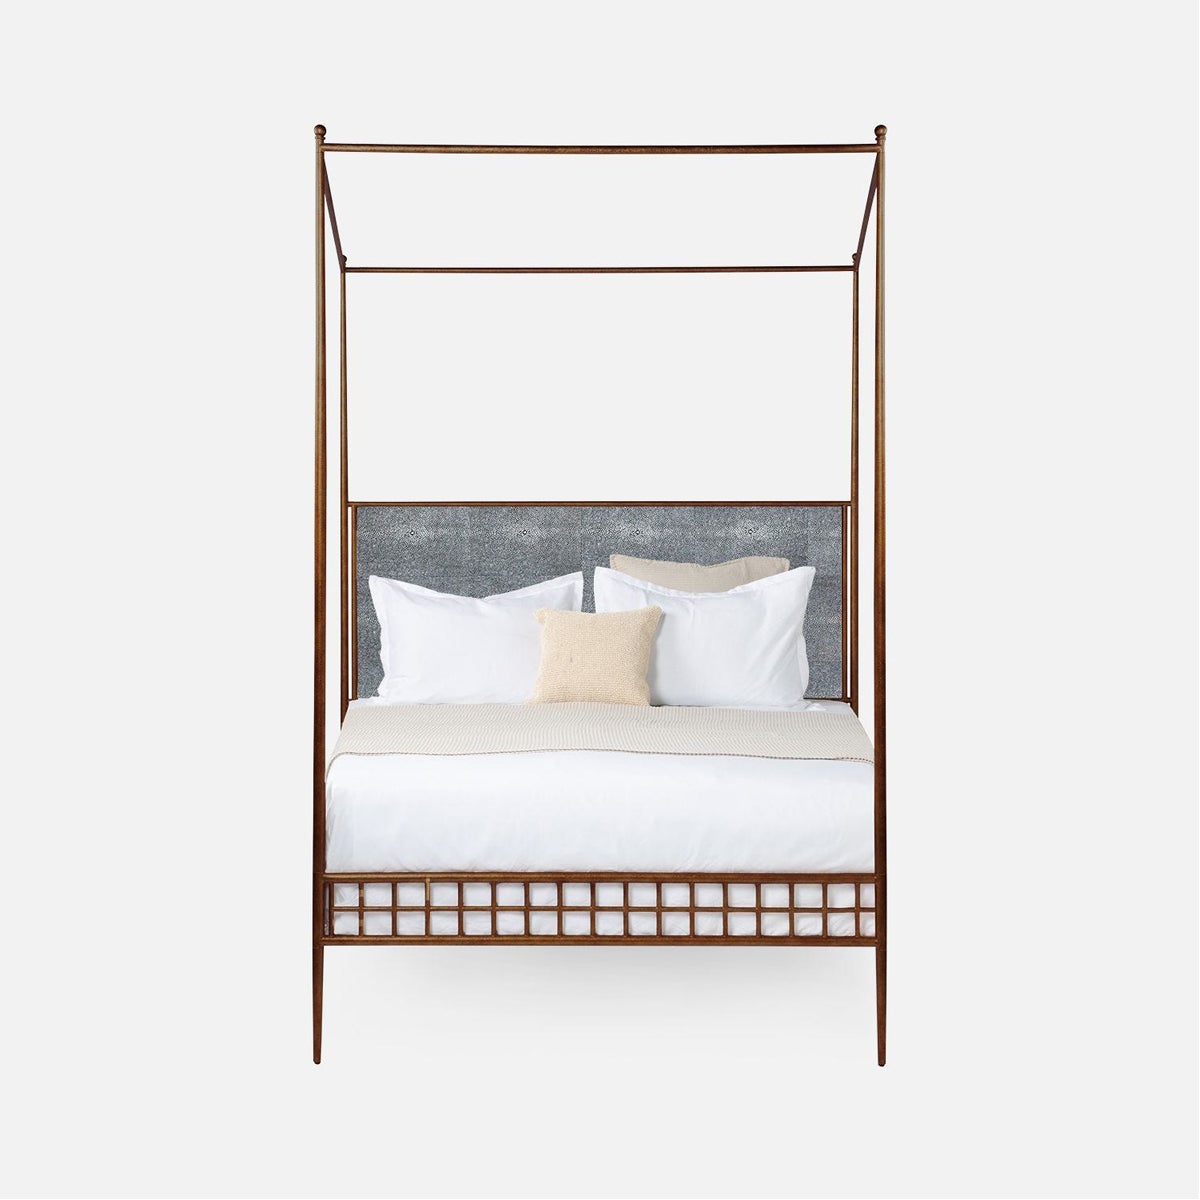 Made Goods Hamilton Textured Iron Canopy Bed in Mondego Cotton Jute